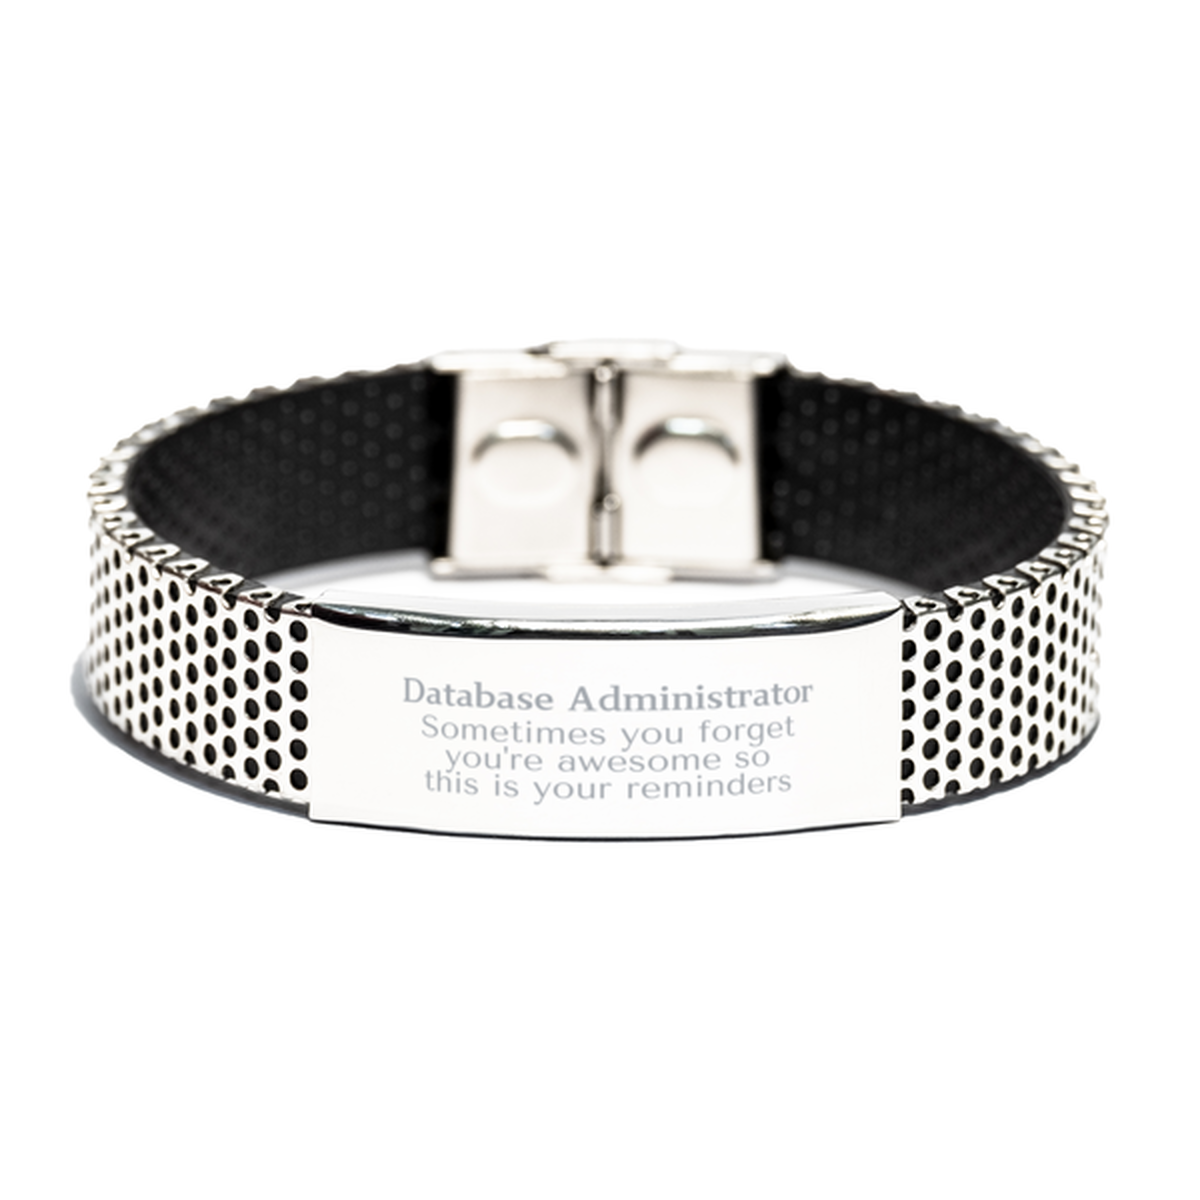 Sentimental Database Administrator Stainless Steel Bracelet, Database Administrator Sometimes you forget you're awesome so this is your reminders, Graduation Christmas Birthday Gifts for Database Administrator, Men, Women, Coworkers